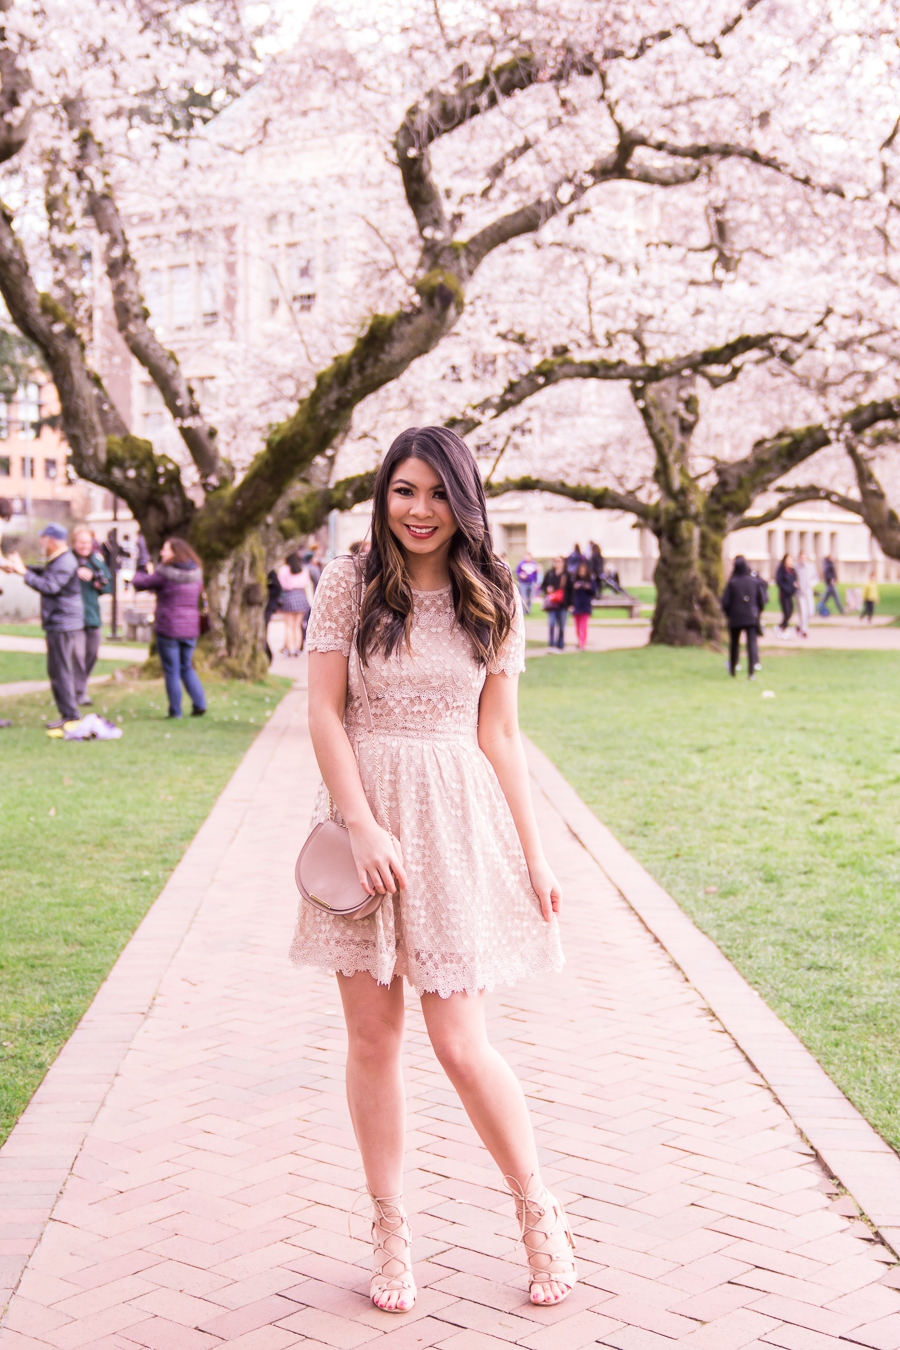 Tips on how to see UW cherry blossoms at University of Washington in Seattle, WA from Seattle fashion blogger Just A Tina Bit. She's wearing a lace dress